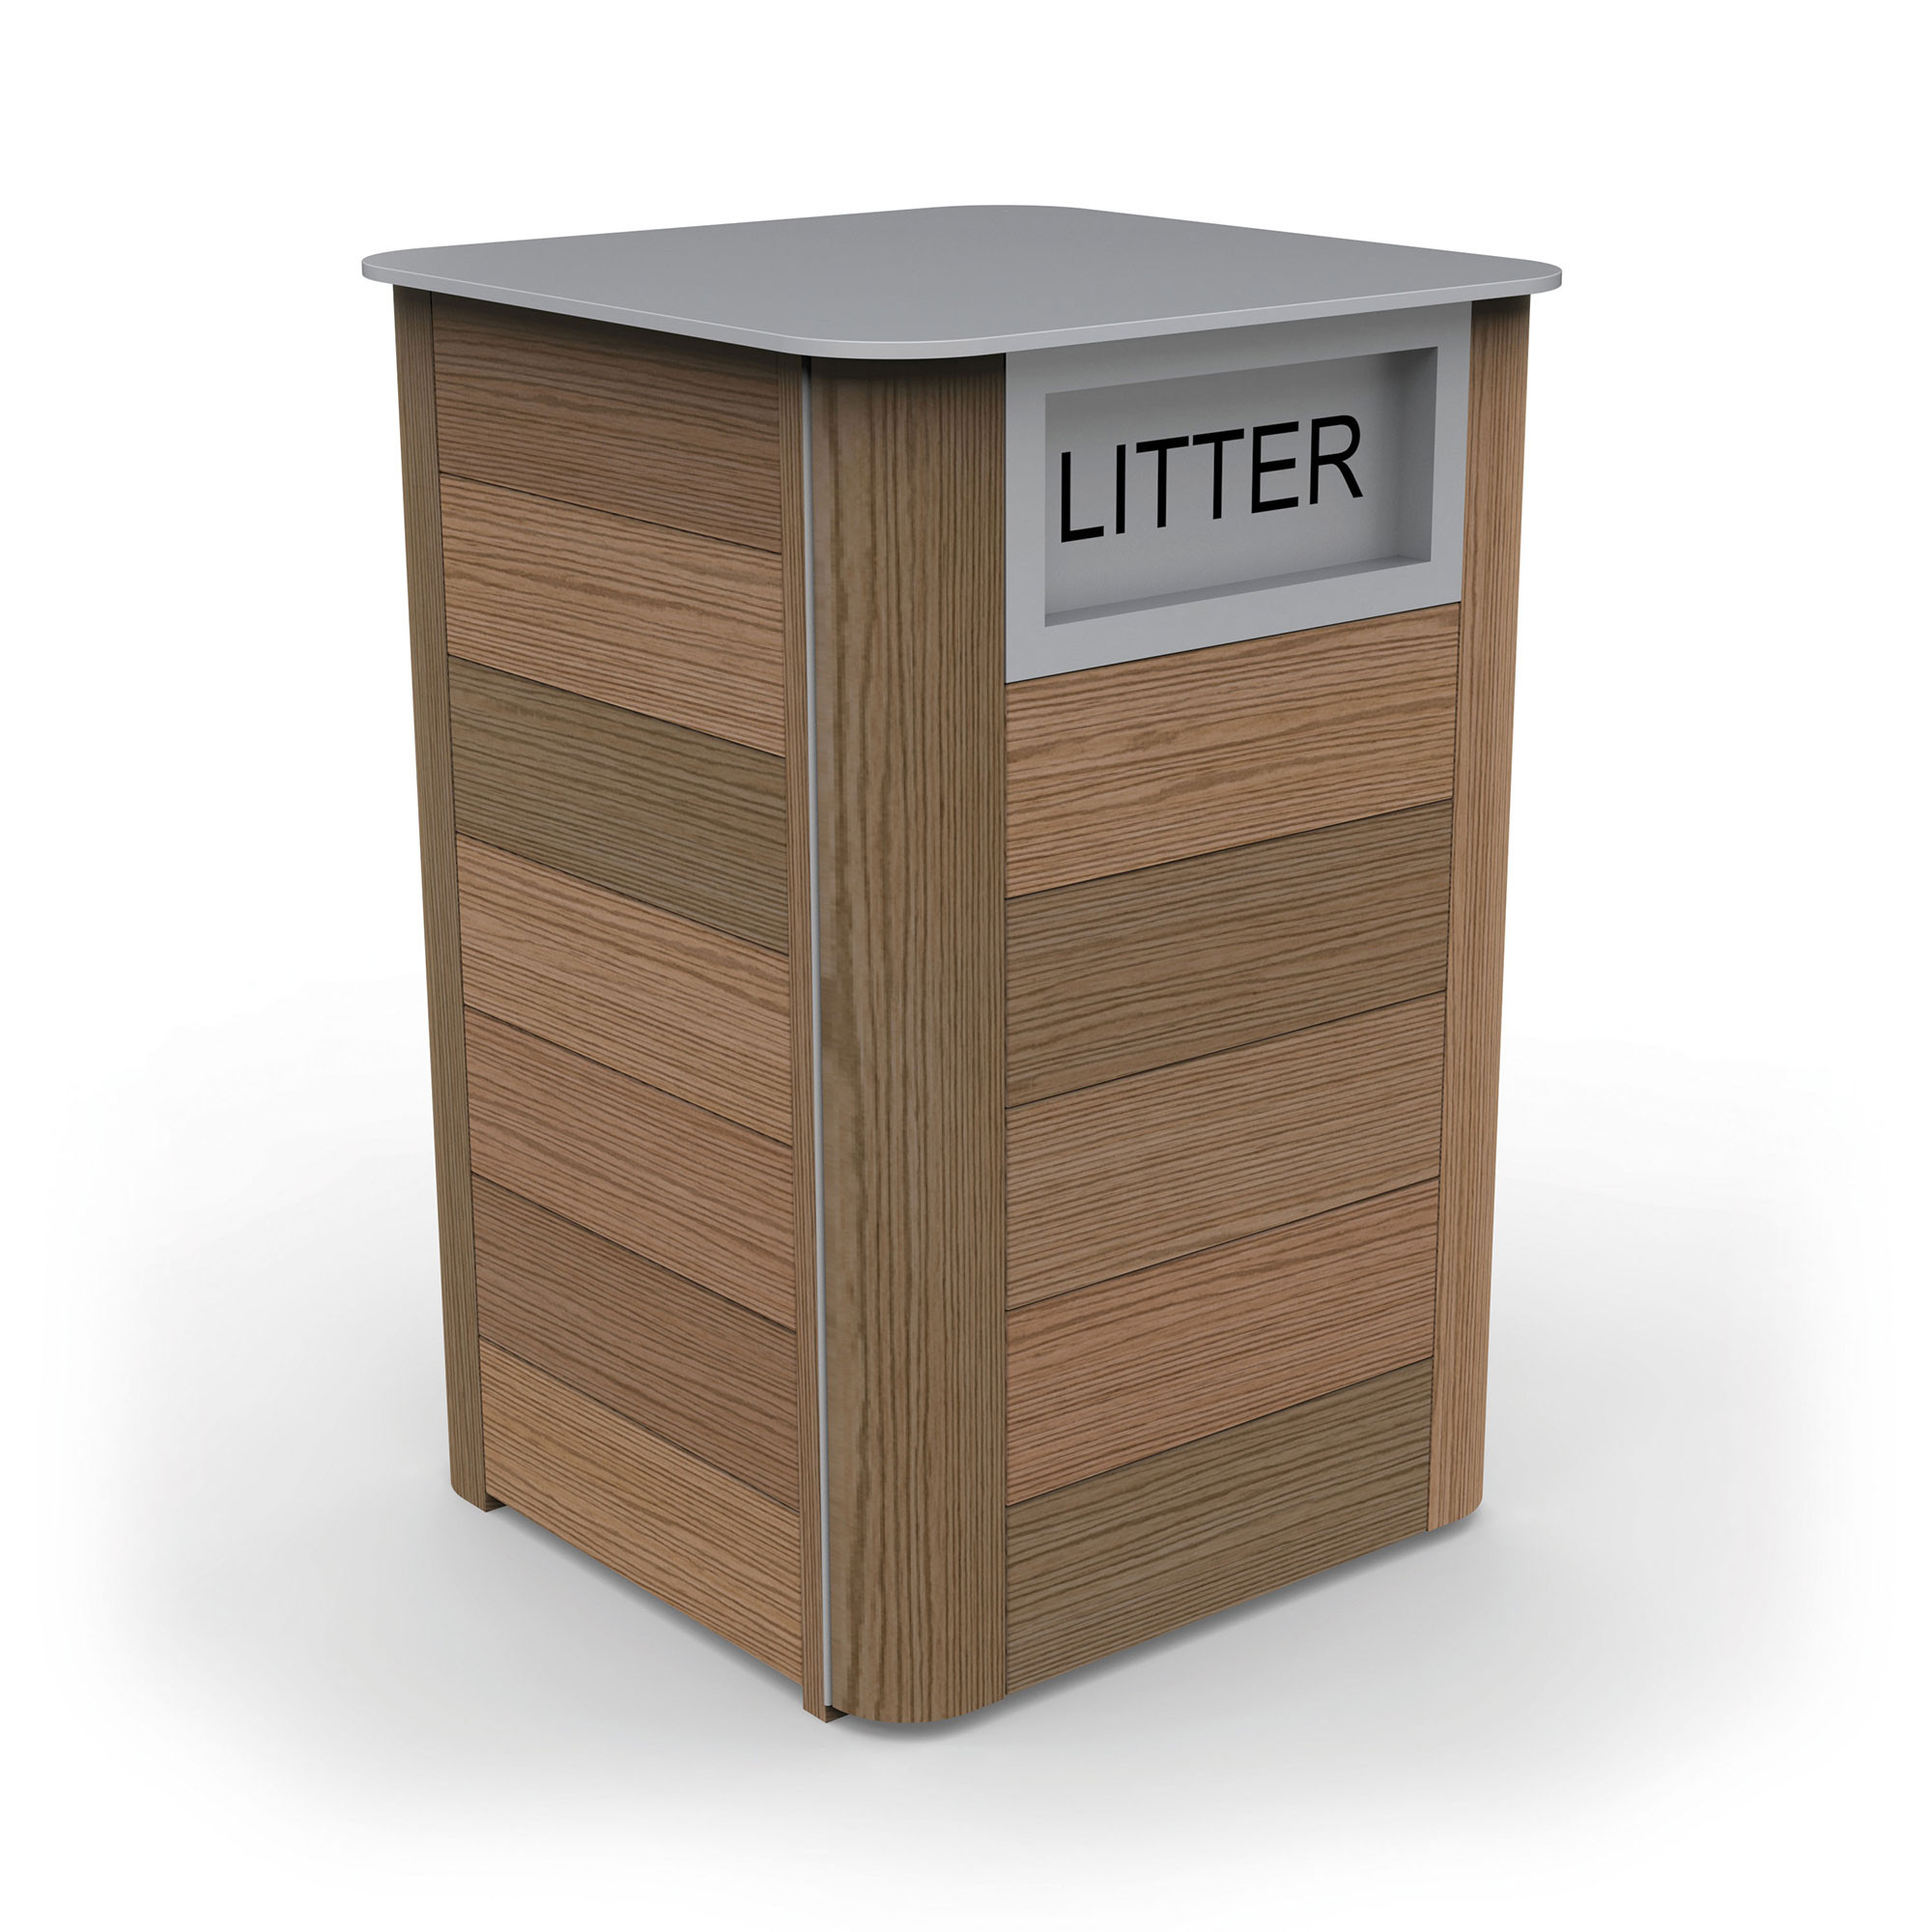 LBSR 112 Square Rounded Lockable Litter Bin